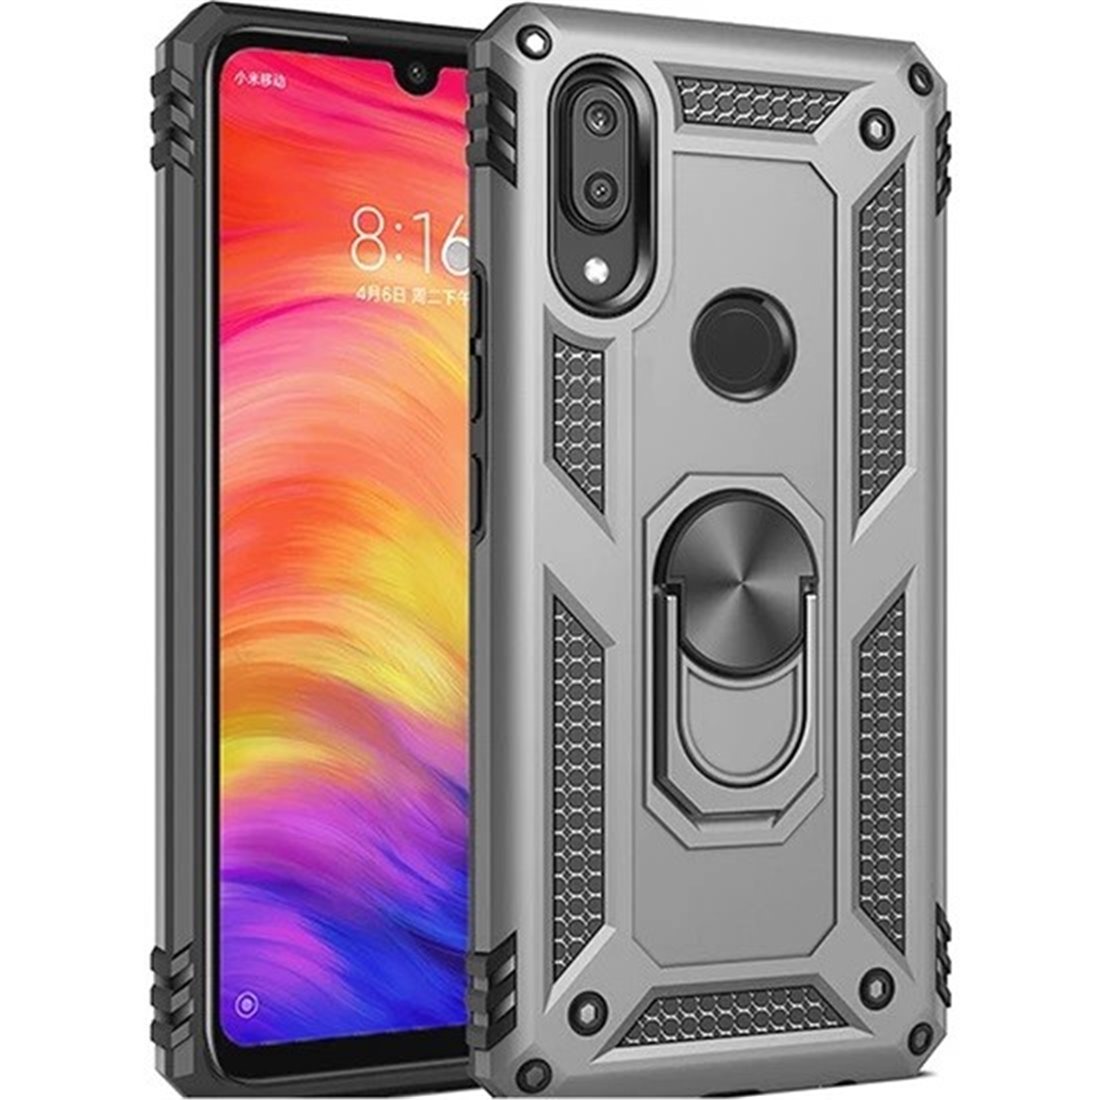 Samsung Galaxy A30 Plastic Silver Back Cover - Solid ring